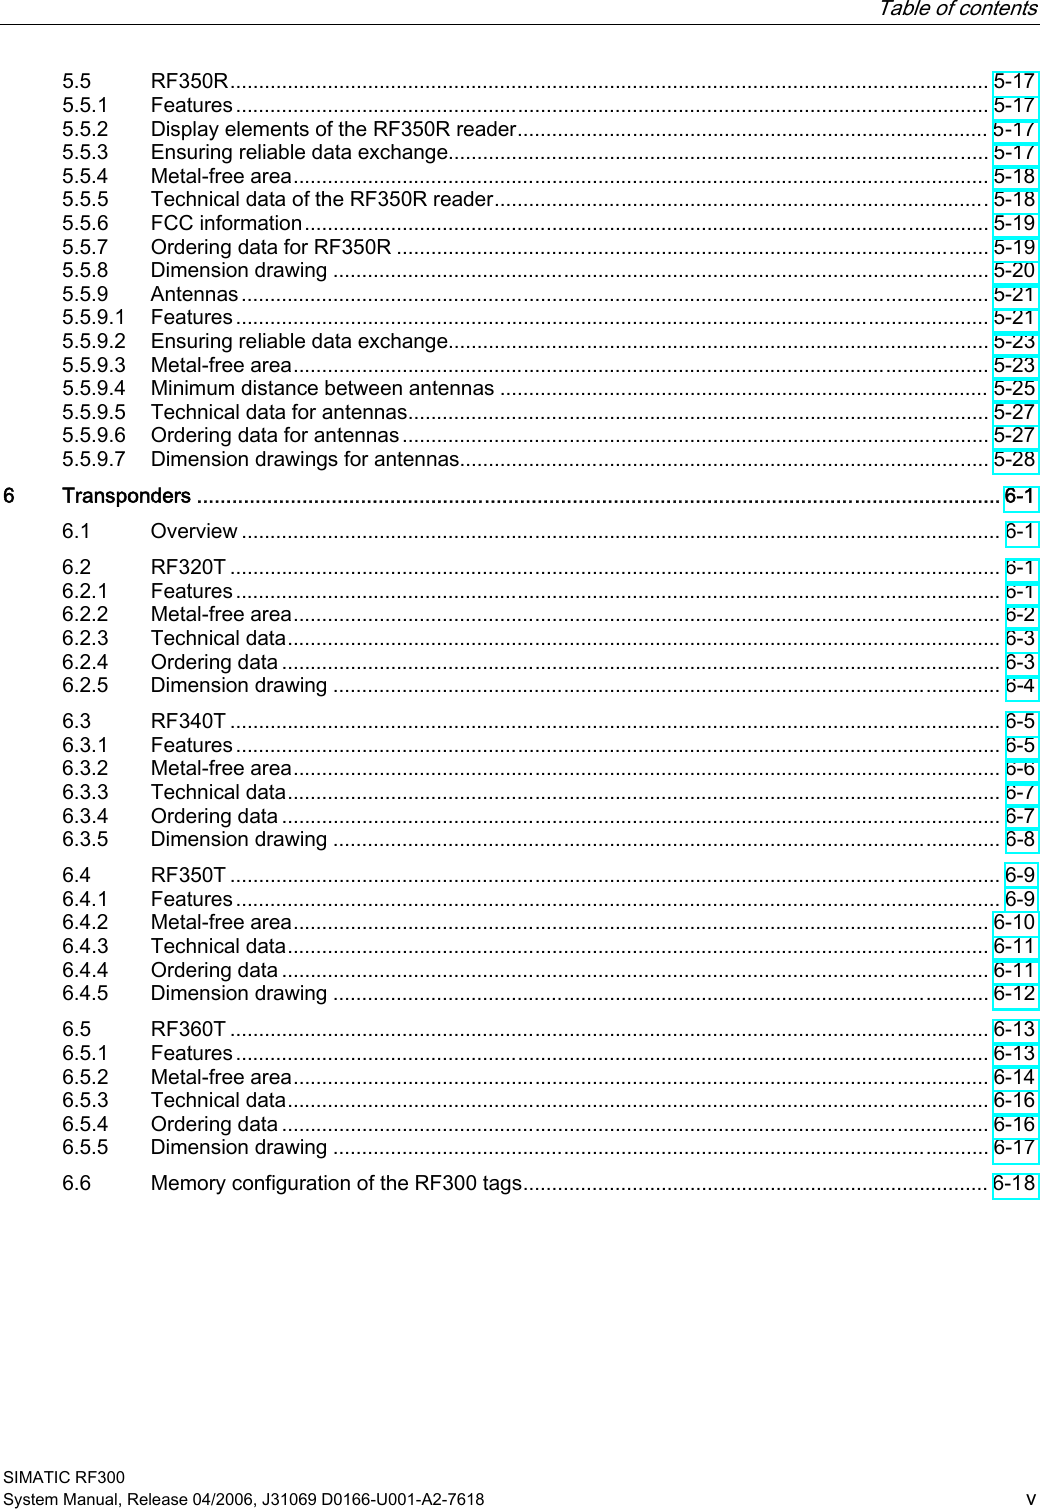   Table of contents SIMATIC RF300 System Manual, Release 04/2006, J31069 D0166-U001-A2-7618  v 5.5  RF350R.................................................................................................................................... 5-17 5.5.1  Features................................................................................................................................... 5-17 5.5.2  Display elements of the RF350R reader.................................................................................. 5-17 5.5.3  Ensuring reliable data exchange.............................................................................................. 5-17 5.5.4  Metal-free area......................................................................................................................... 5-18 5.5.5  Technical data of the RF350R reader...................................................................................... 5-18 5.5.6  FCC information....................................................................................................................... 5-19 5.5.7  Ordering data for RF350R ....................................................................................................... 5-19 5.5.8  Dimension drawing .................................................................................................................. 5-20 5.5.9  Antennas.................................................................................................................................. 5-21 5.5.9.1  Features................................................................................................................................... 5-21 5.5.9.2  Ensuring reliable data exchange.............................................................................................. 5-23 5.5.9.3  Metal-free area......................................................................................................................... 5-23 5.5.9.4  Minimum distance between antennas ..................................................................................... 5-25 5.5.9.5  Technical data for antennas..................................................................................................... 5-27 5.5.9.6  Ordering data for antennas...................................................................................................... 5-27 5.5.9.7  Dimension drawings for antennas............................................................................................ 5-28 6  Transponders ......................................................................................................................................... 6-1 6.1  Overview .................................................................................................................................... 6-1 6.2  RF320T ...................................................................................................................................... 6-1 6.2.1  Features..................................................................................................................................... 6-1 6.2.2  Metal-free area........................................................................................................................... 6-2 6.2.3  Technical data............................................................................................................................ 6-3 6.2.4  Ordering data ............................................................................................................................. 6-3 6.2.5  Dimension drawing .................................................................................................................... 6-4 6.3  RF340T ...................................................................................................................................... 6-5 6.3.1  Features..................................................................................................................................... 6-5 6.3.2  Metal-free area........................................................................................................................... 6-6 6.3.3  Technical data............................................................................................................................ 6-7 6.3.4  Ordering data ............................................................................................................................. 6-7 6.3.5  Dimension drawing .................................................................................................................... 6-8 6.4  RF350T ...................................................................................................................................... 6-9 6.4.1  Features..................................................................................................................................... 6-9 6.4.2  Metal-free area......................................................................................................................... 6-10 6.4.3  Technical data.......................................................................................................................... 6-11 6.4.4  Ordering data ........................................................................................................................... 6-11 6.4.5  Dimension drawing .................................................................................................................. 6-12 6.5  RF360T .................................................................................................................................... 6-13 6.5.1  Features................................................................................................................................... 6-13 6.5.2  Metal-free area......................................................................................................................... 6-14 6.5.3  Technical data.......................................................................................................................... 6-16 6.5.4  Ordering data ........................................................................................................................... 6-16 6.5.5  Dimension drawing .................................................................................................................. 6-17 6.6  Memory configuration of the RF300 tags................................................................................. 6-18 